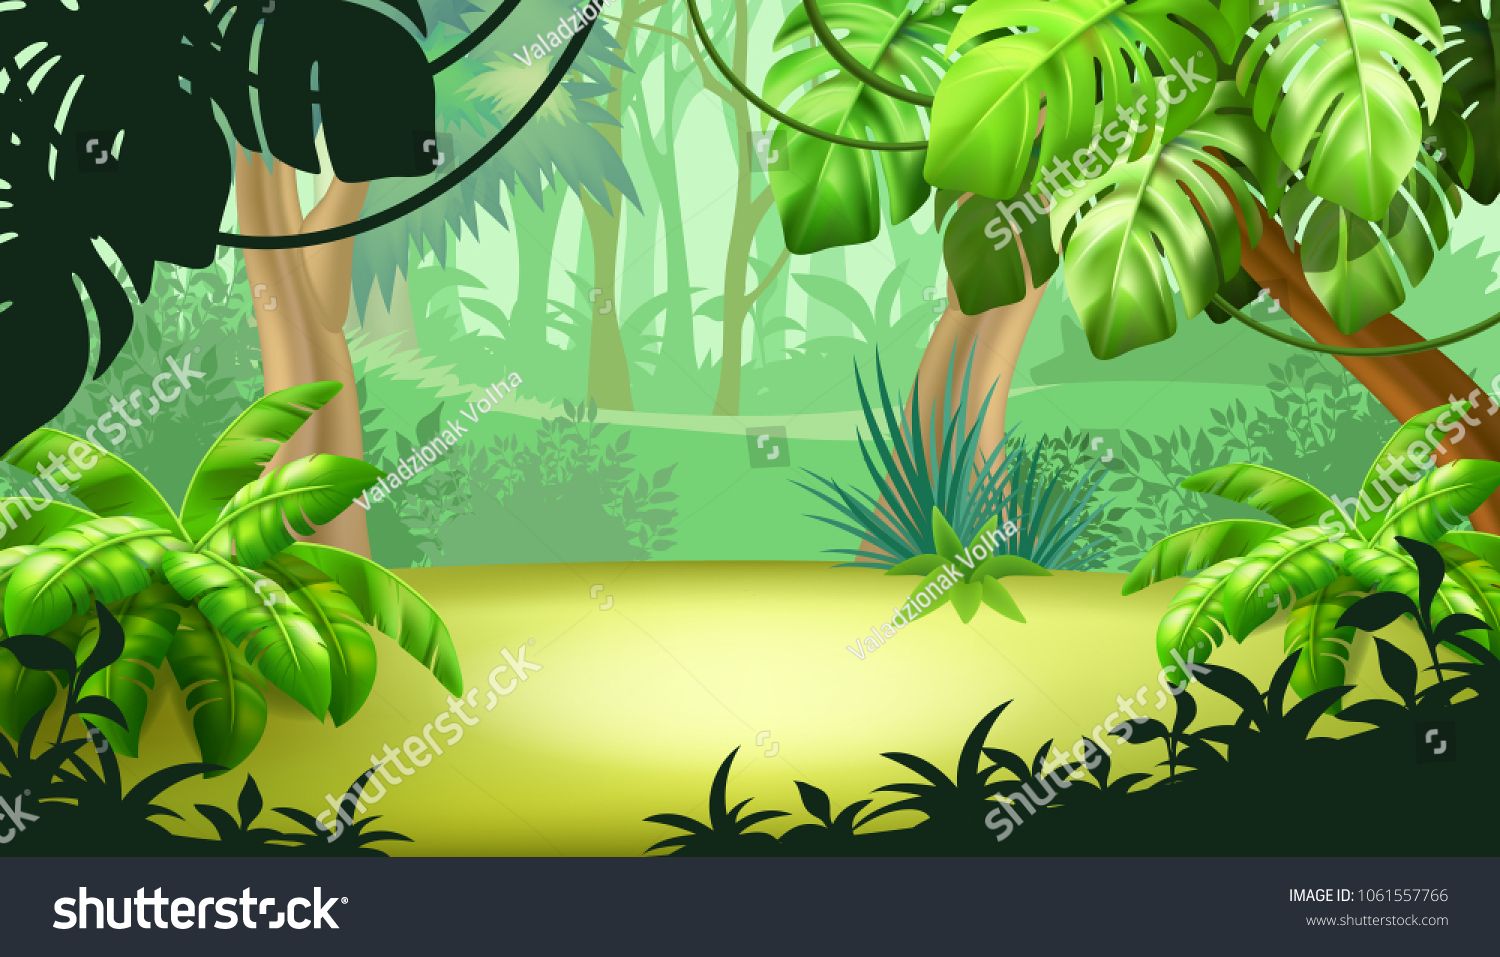 Game Landscape With Tropical Jungle Scene Background Vector